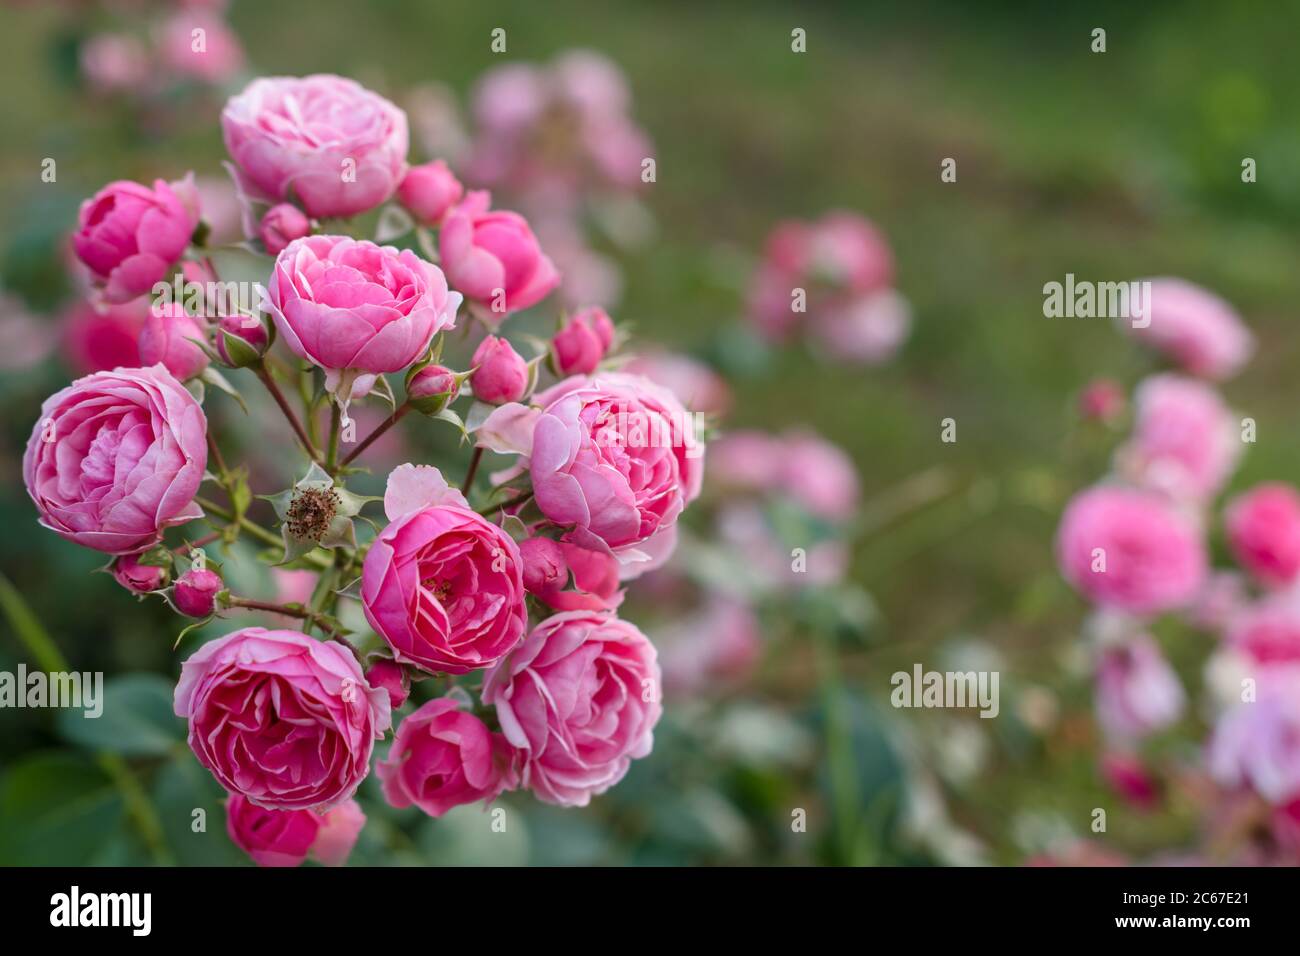 Pink roses in the garden. Blooming climbing roses on the bush. Flowers growing in the garden. Stock Photo